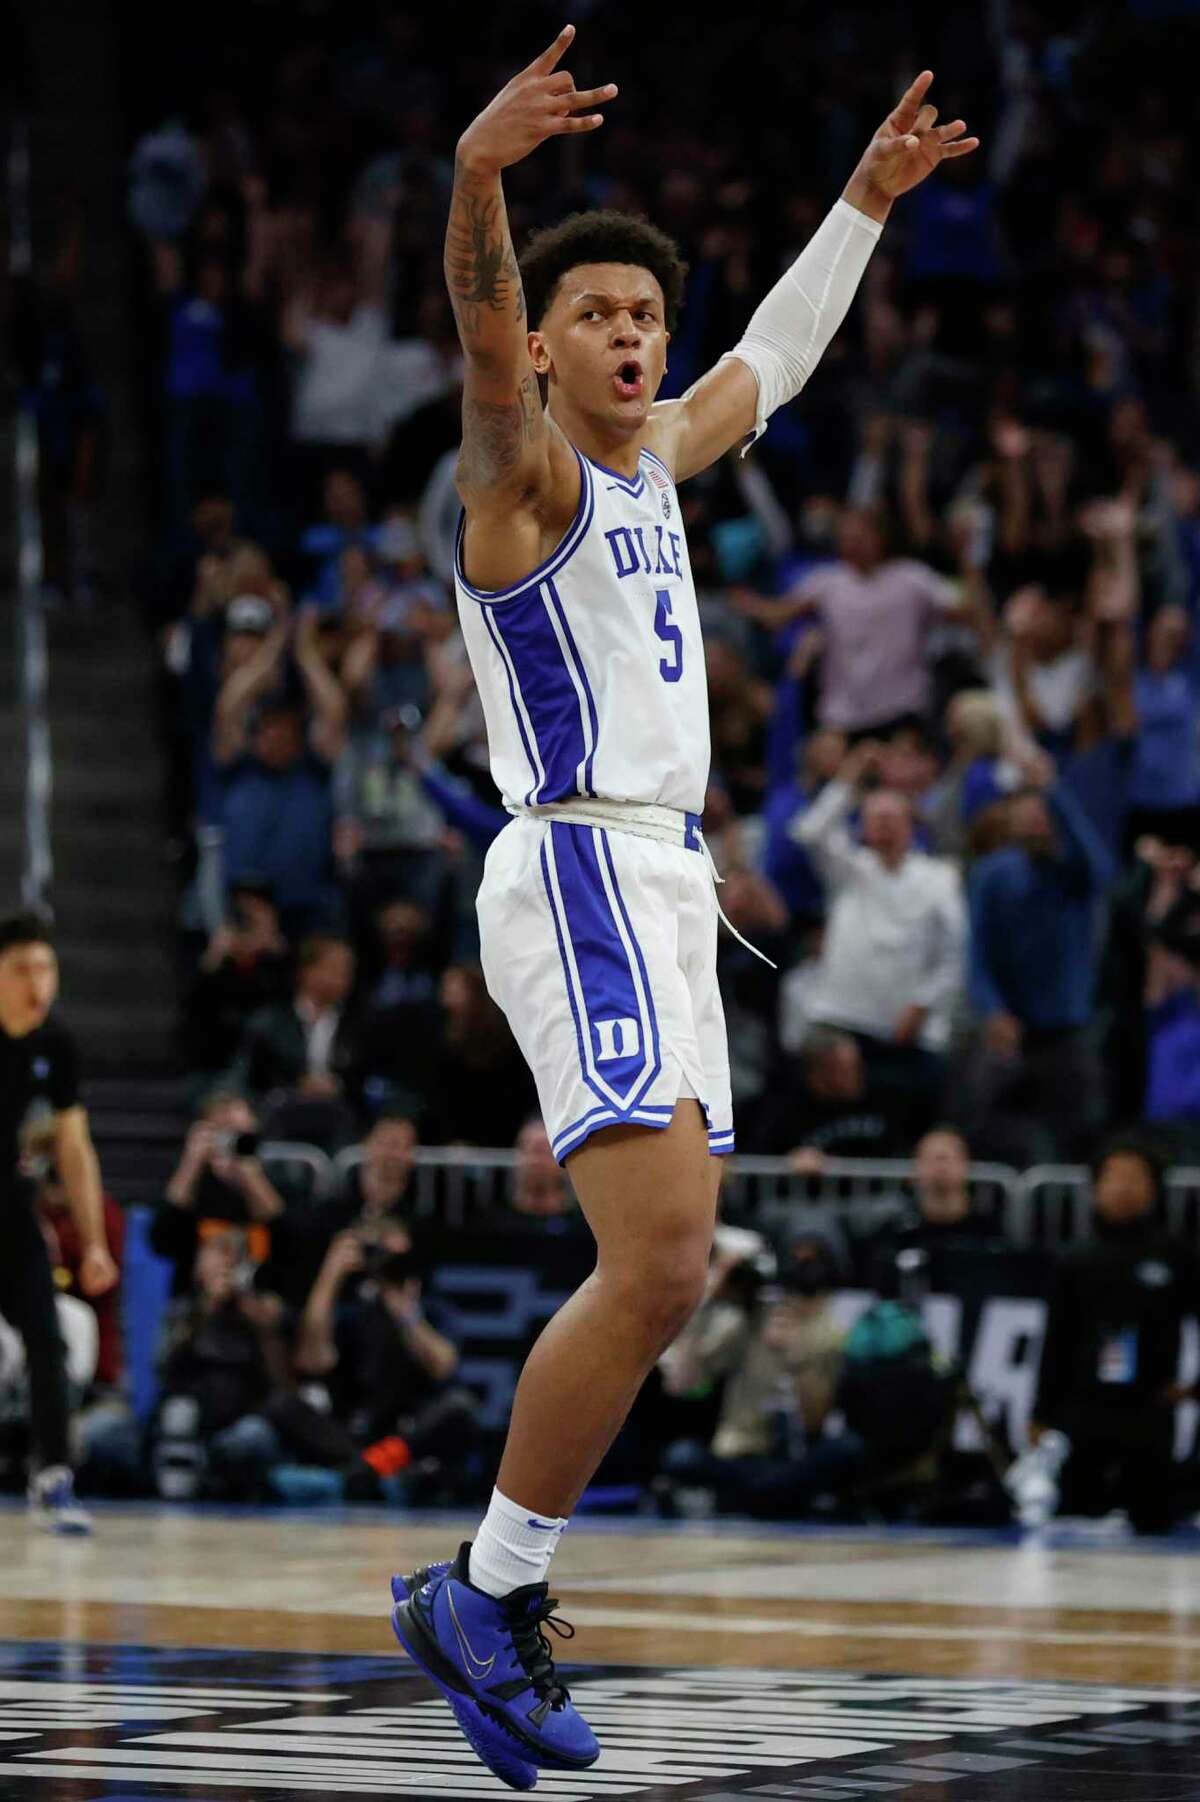 Duke forward Paolo Banchero reacts after teammate guard Trevor Keels shoots a buzzer-beating three-pointer during the first half of a college basketball game against Arkansas in the Elite 8 round game of the 2022 NCAA Men's Basketball Tournament at Chase Center in San Francisco, Saturday, March 26, 2022.